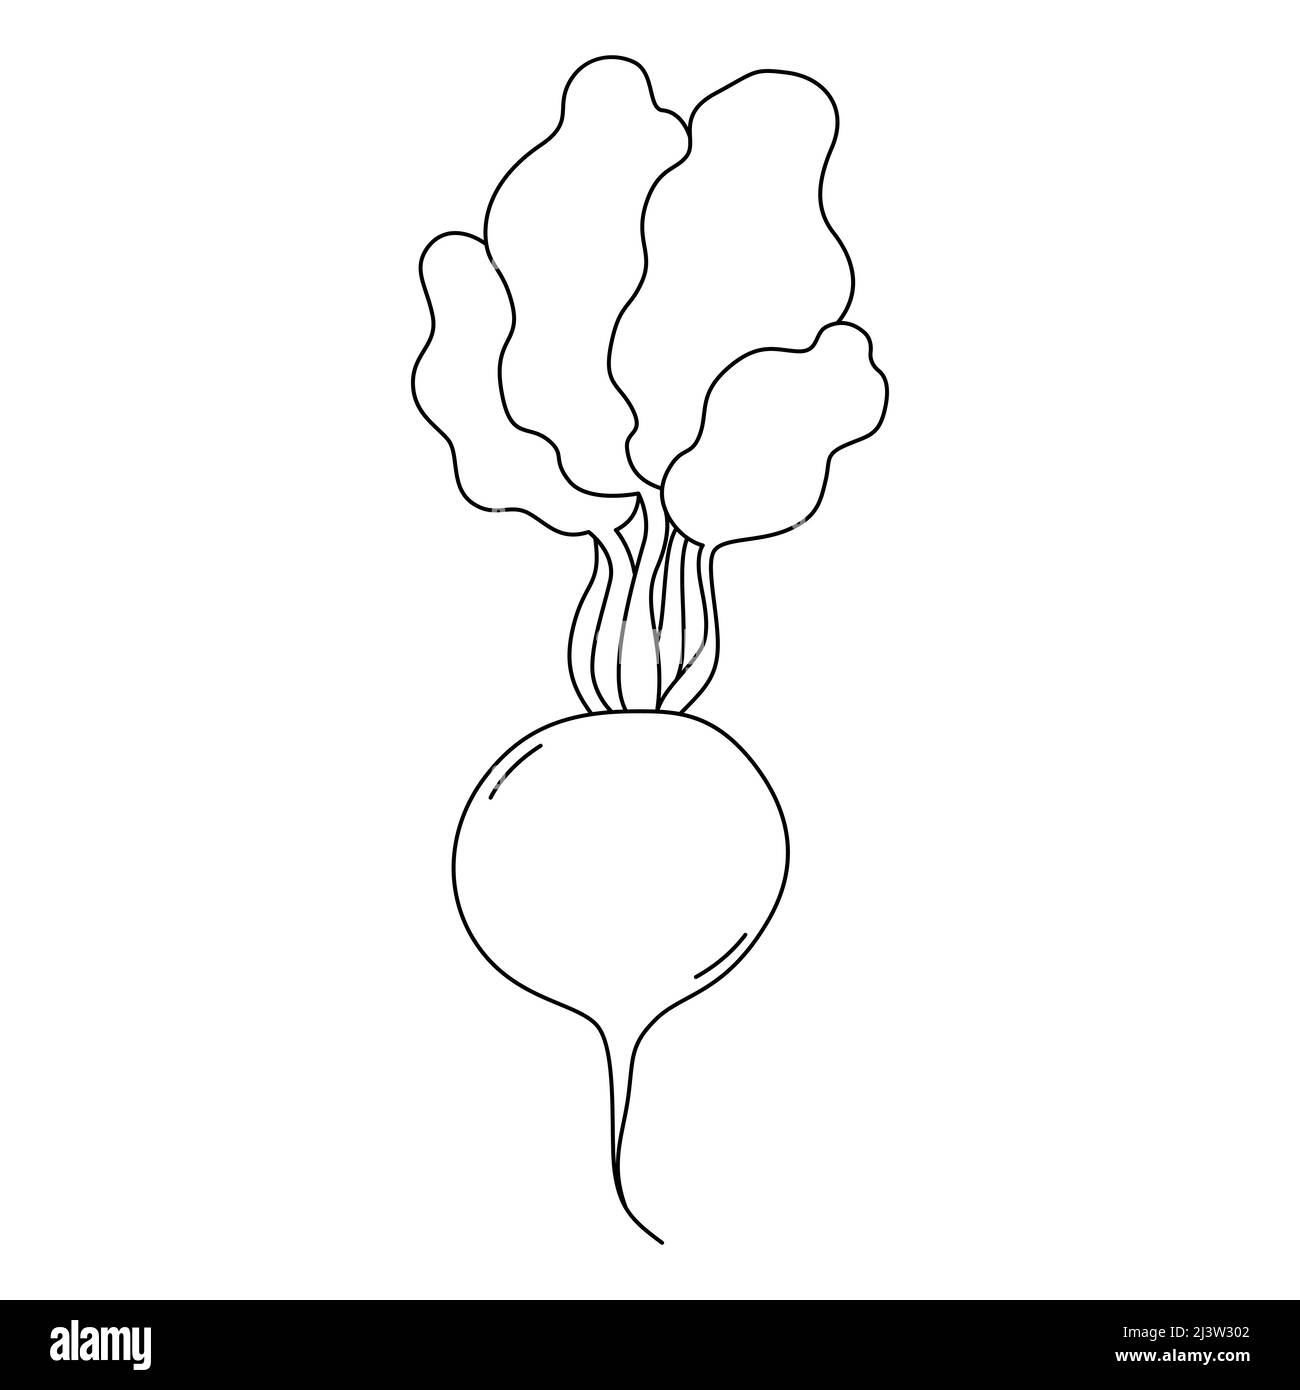 Black and white vector illustration of radish for coloring book. Cartoon style Stock Vector